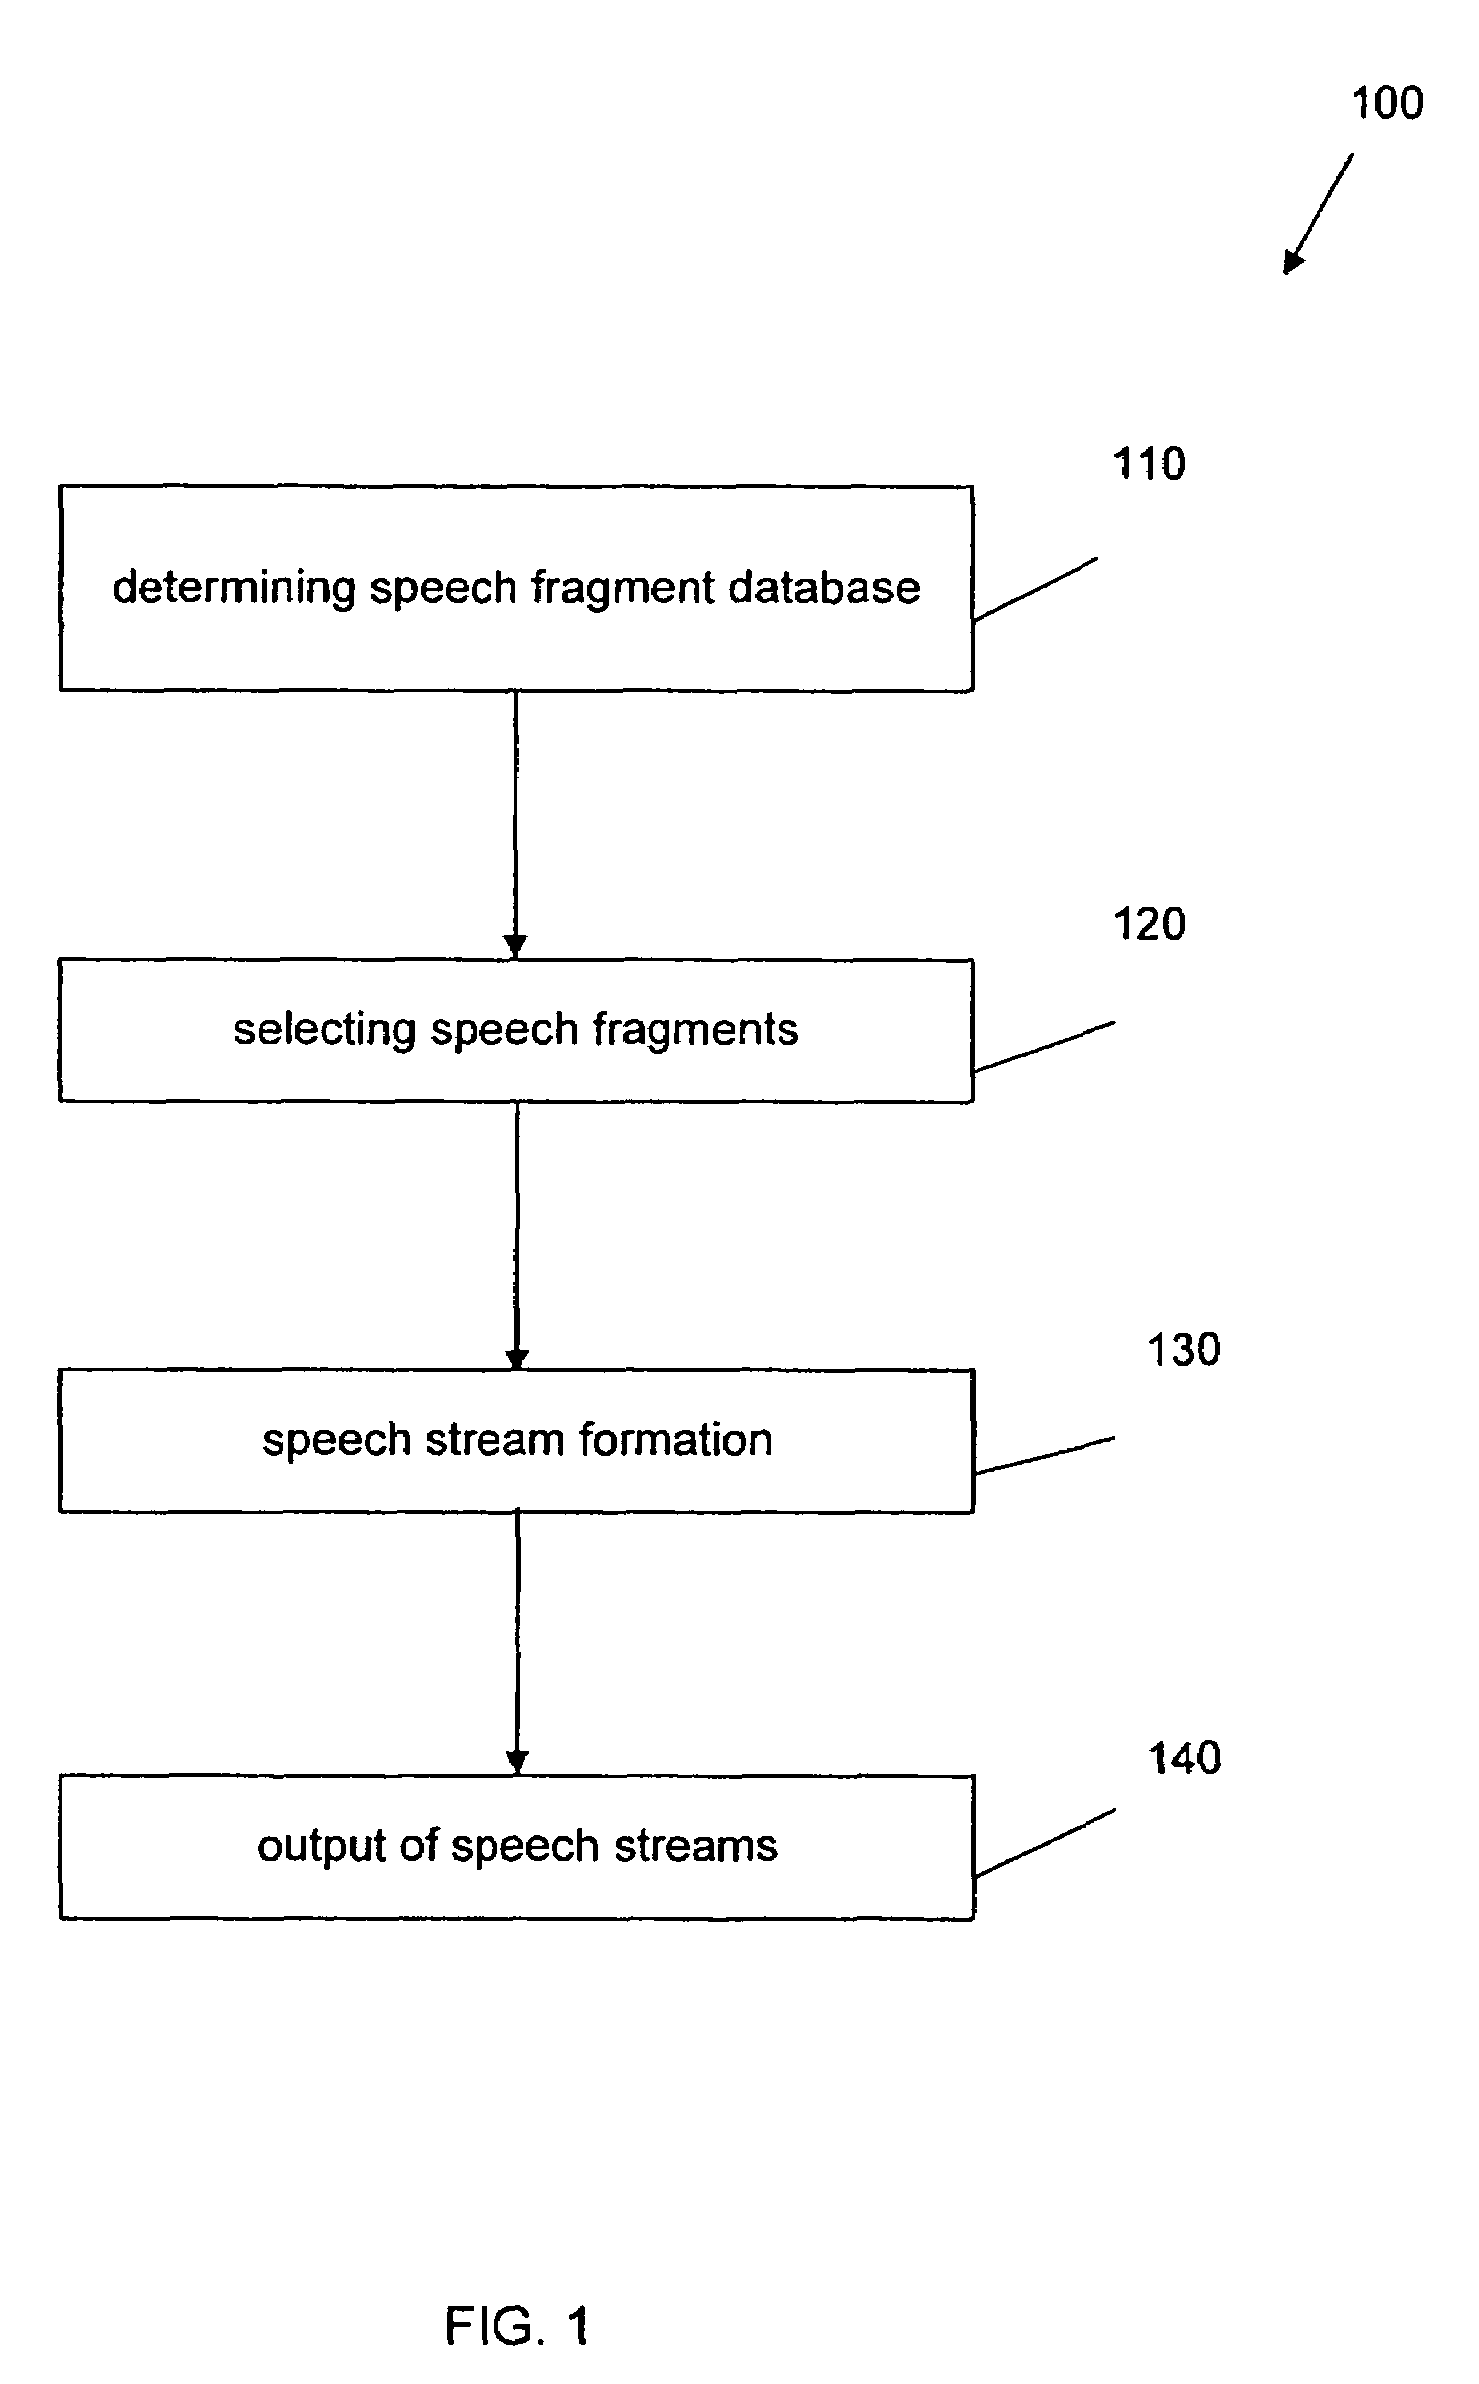 Disruption of speech understanding by adding a privacy sound thereto